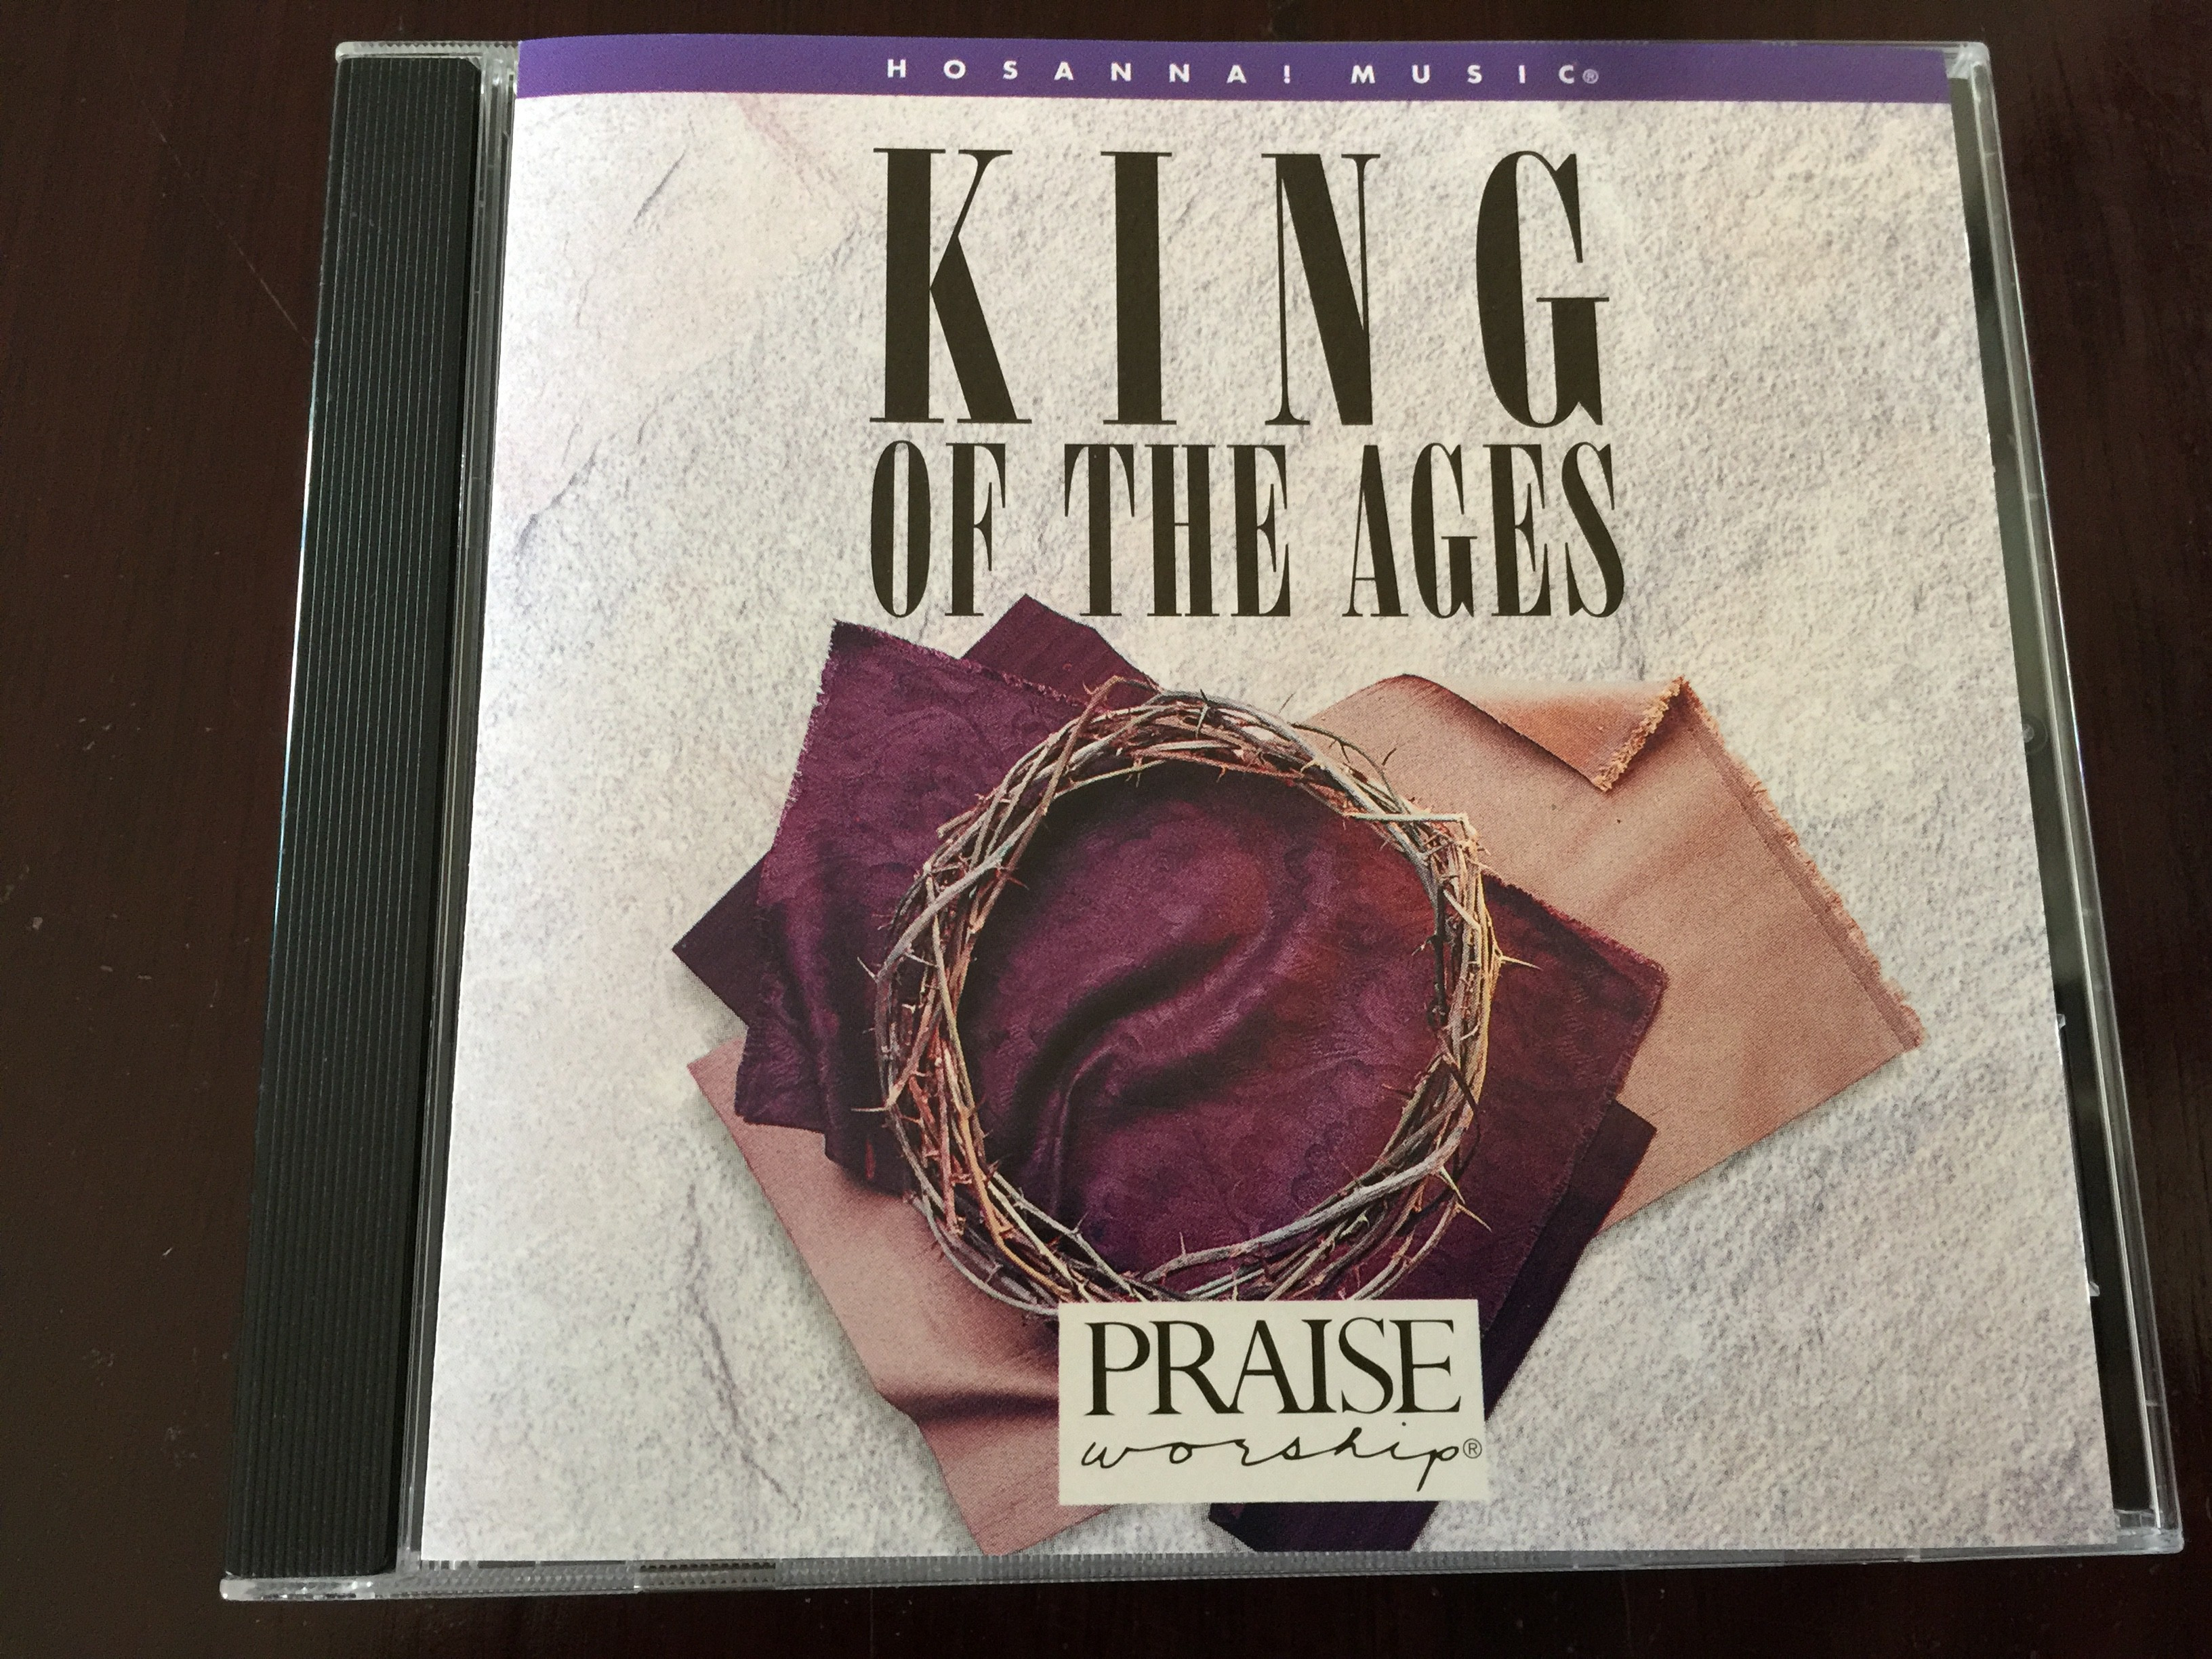 King of the Ages - Hosanna Music 1